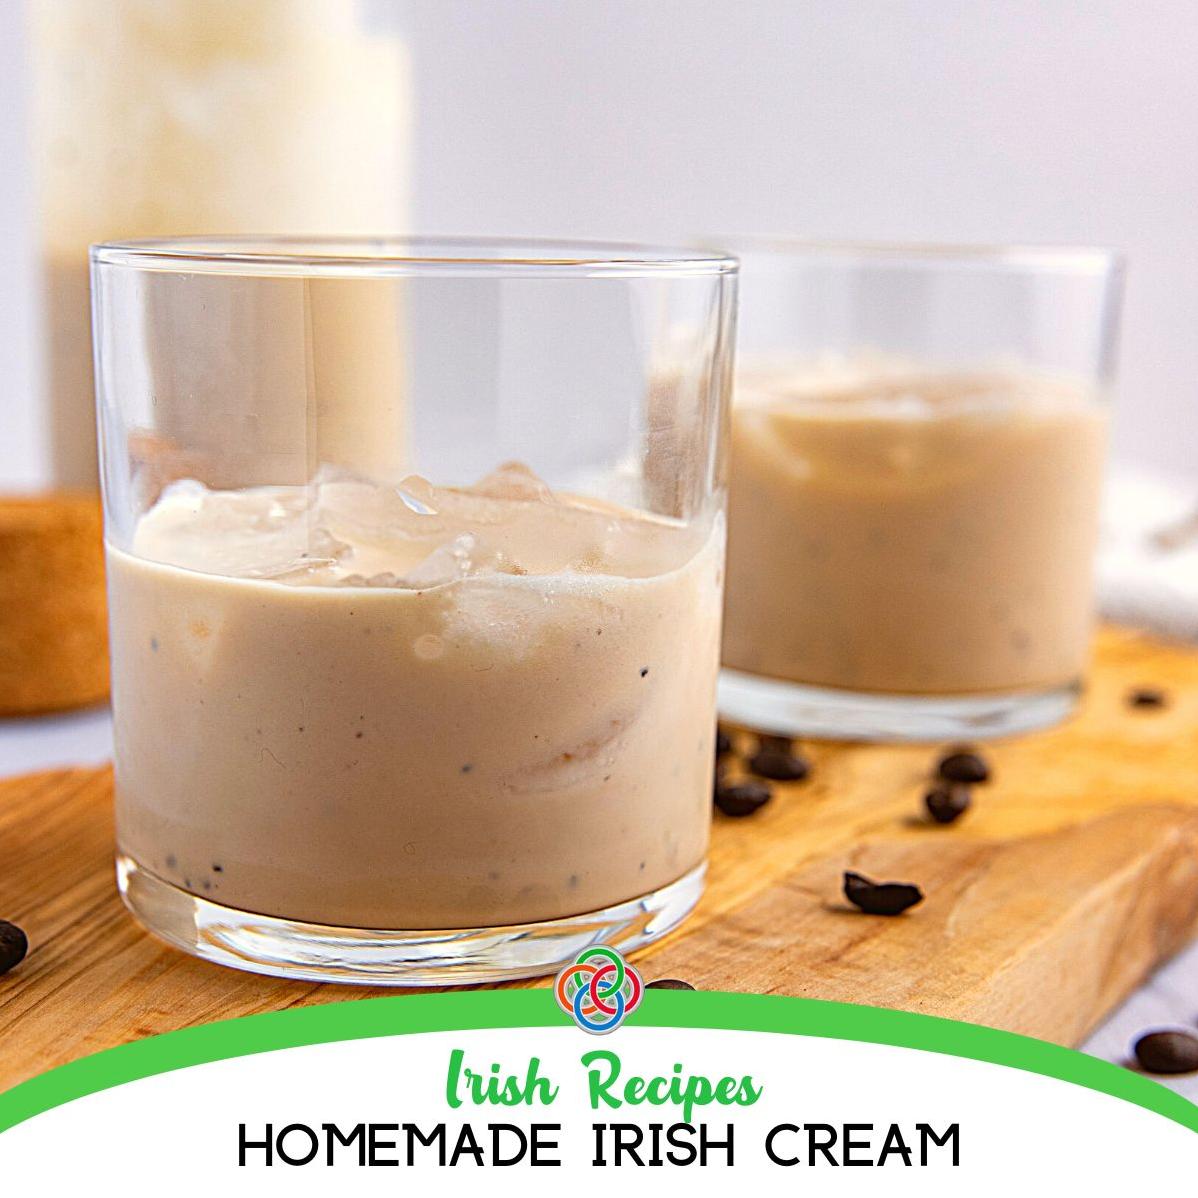  The ultimate treat to serve at your St. Patrick's Day party